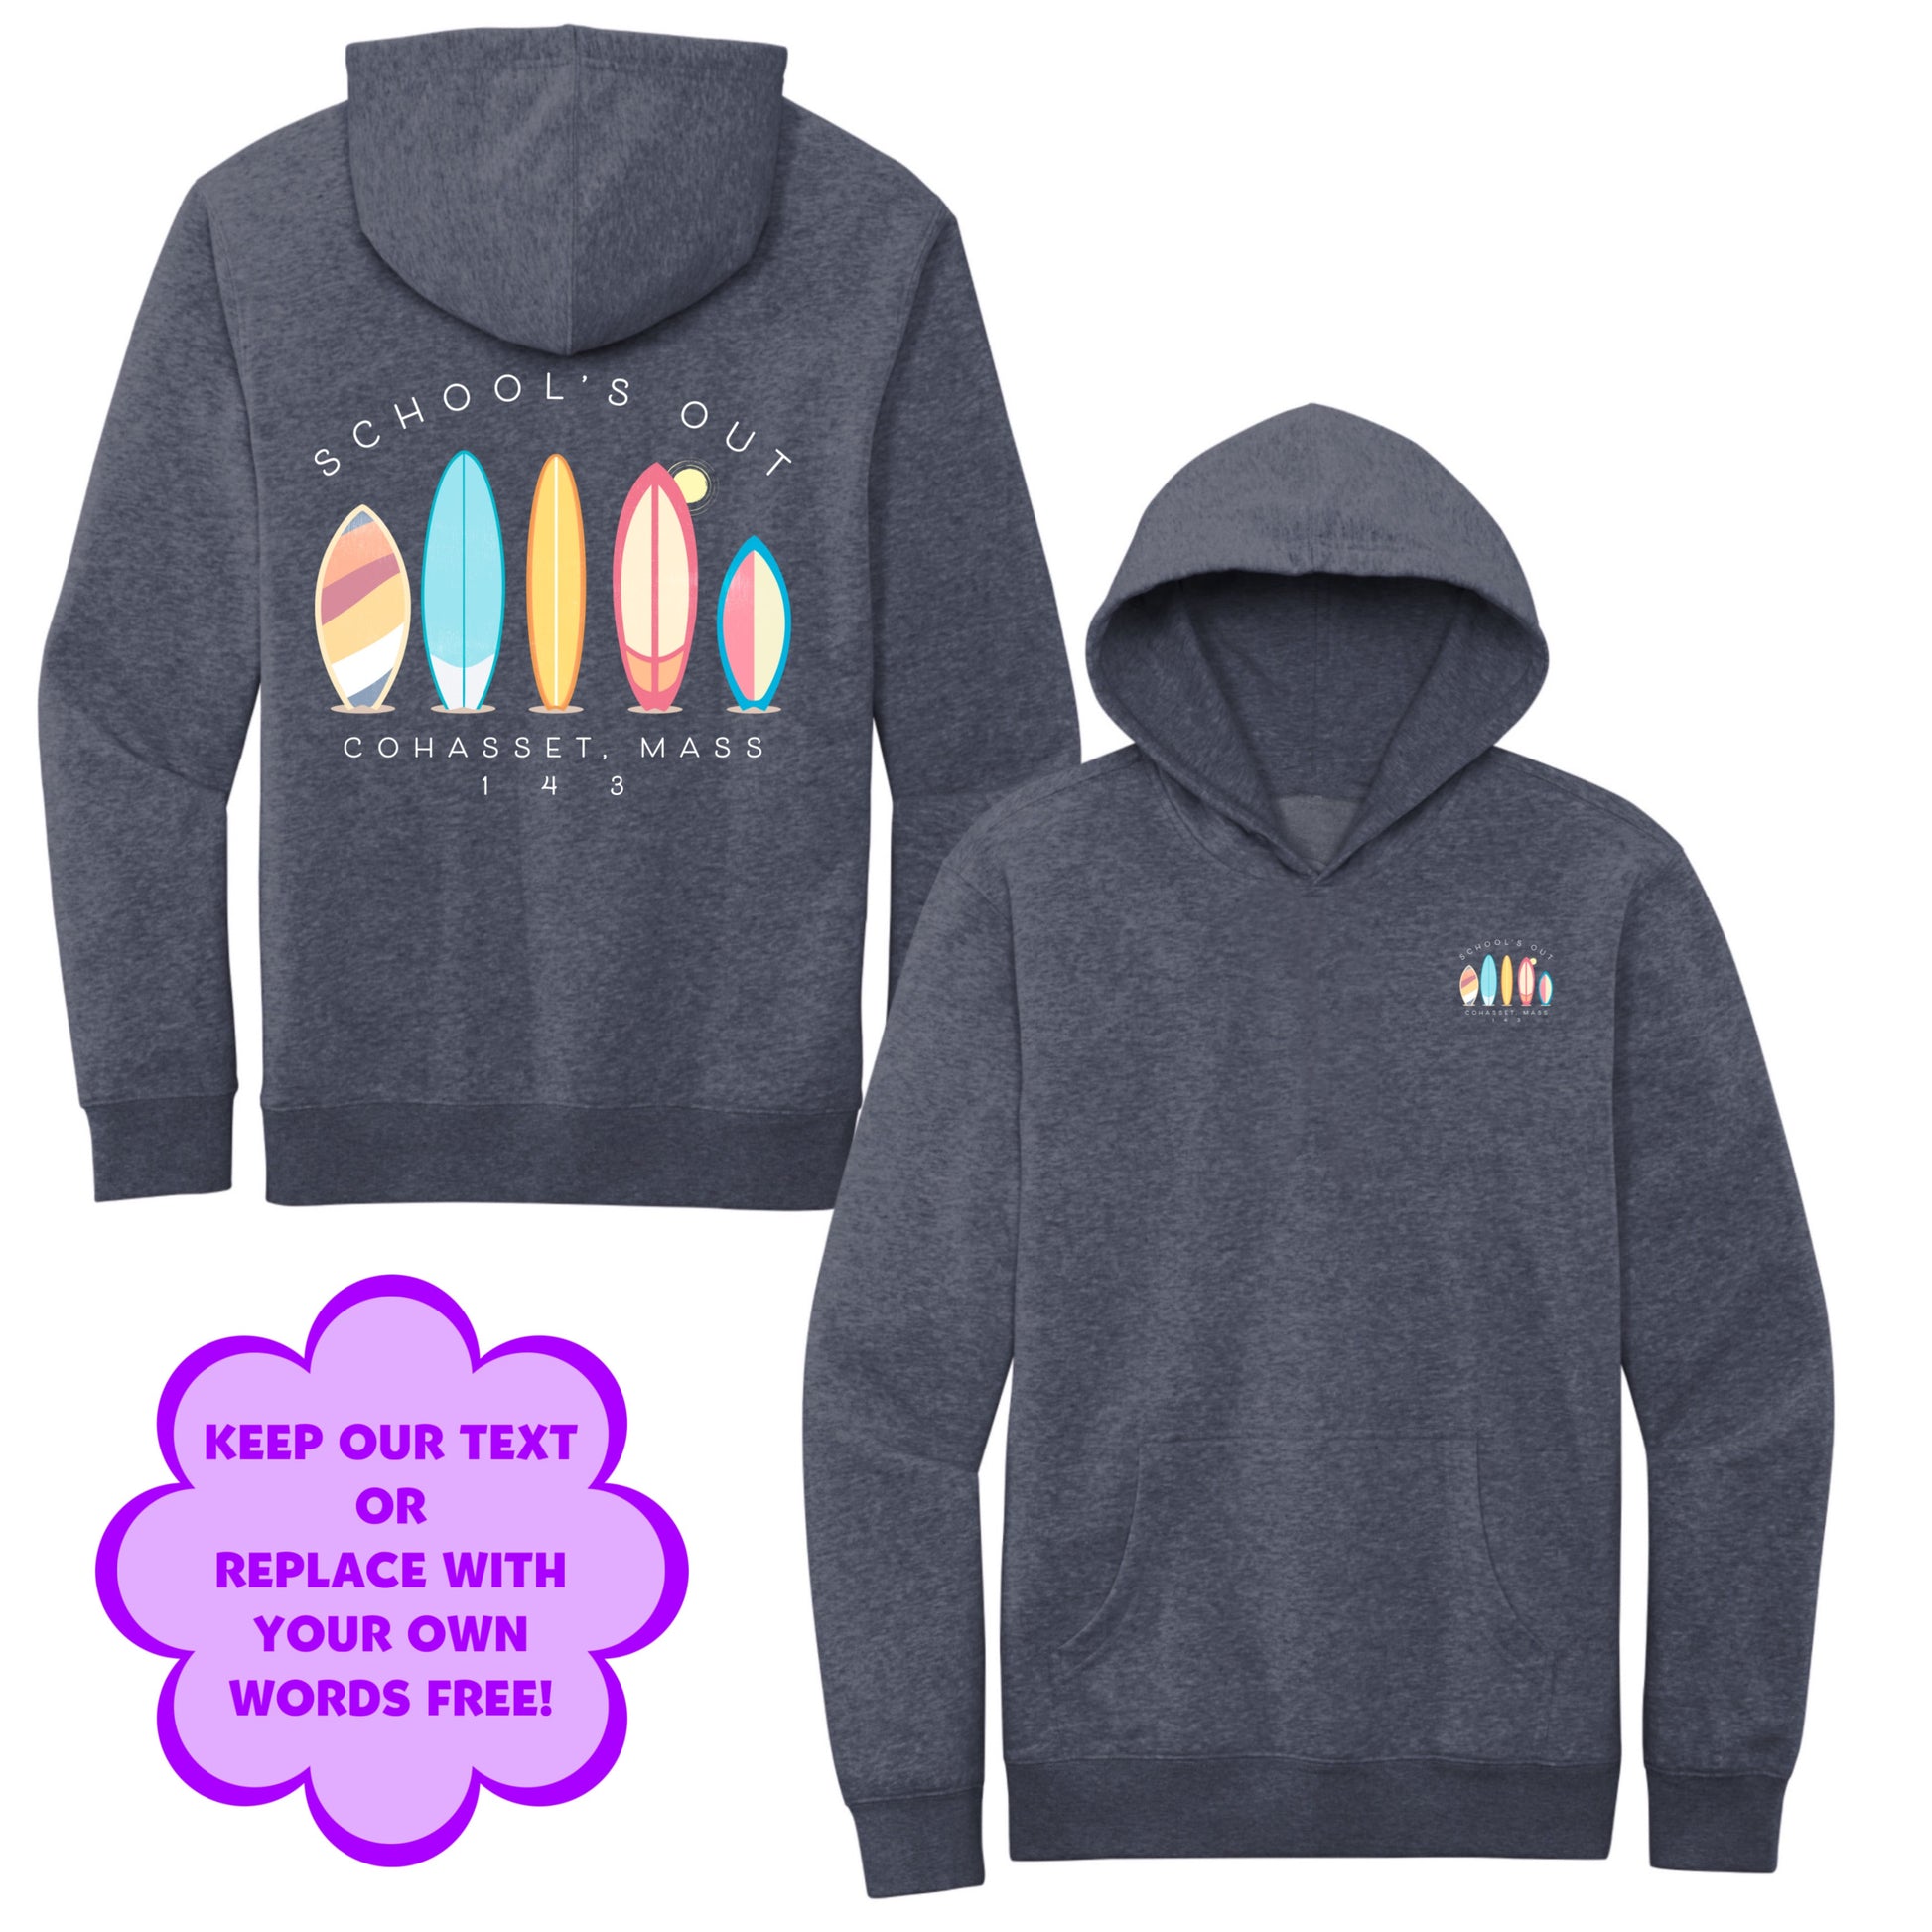 Personalize Free Surfboards, Cohasset, Adult Fleece Hoodies from Baby Squid Ink 